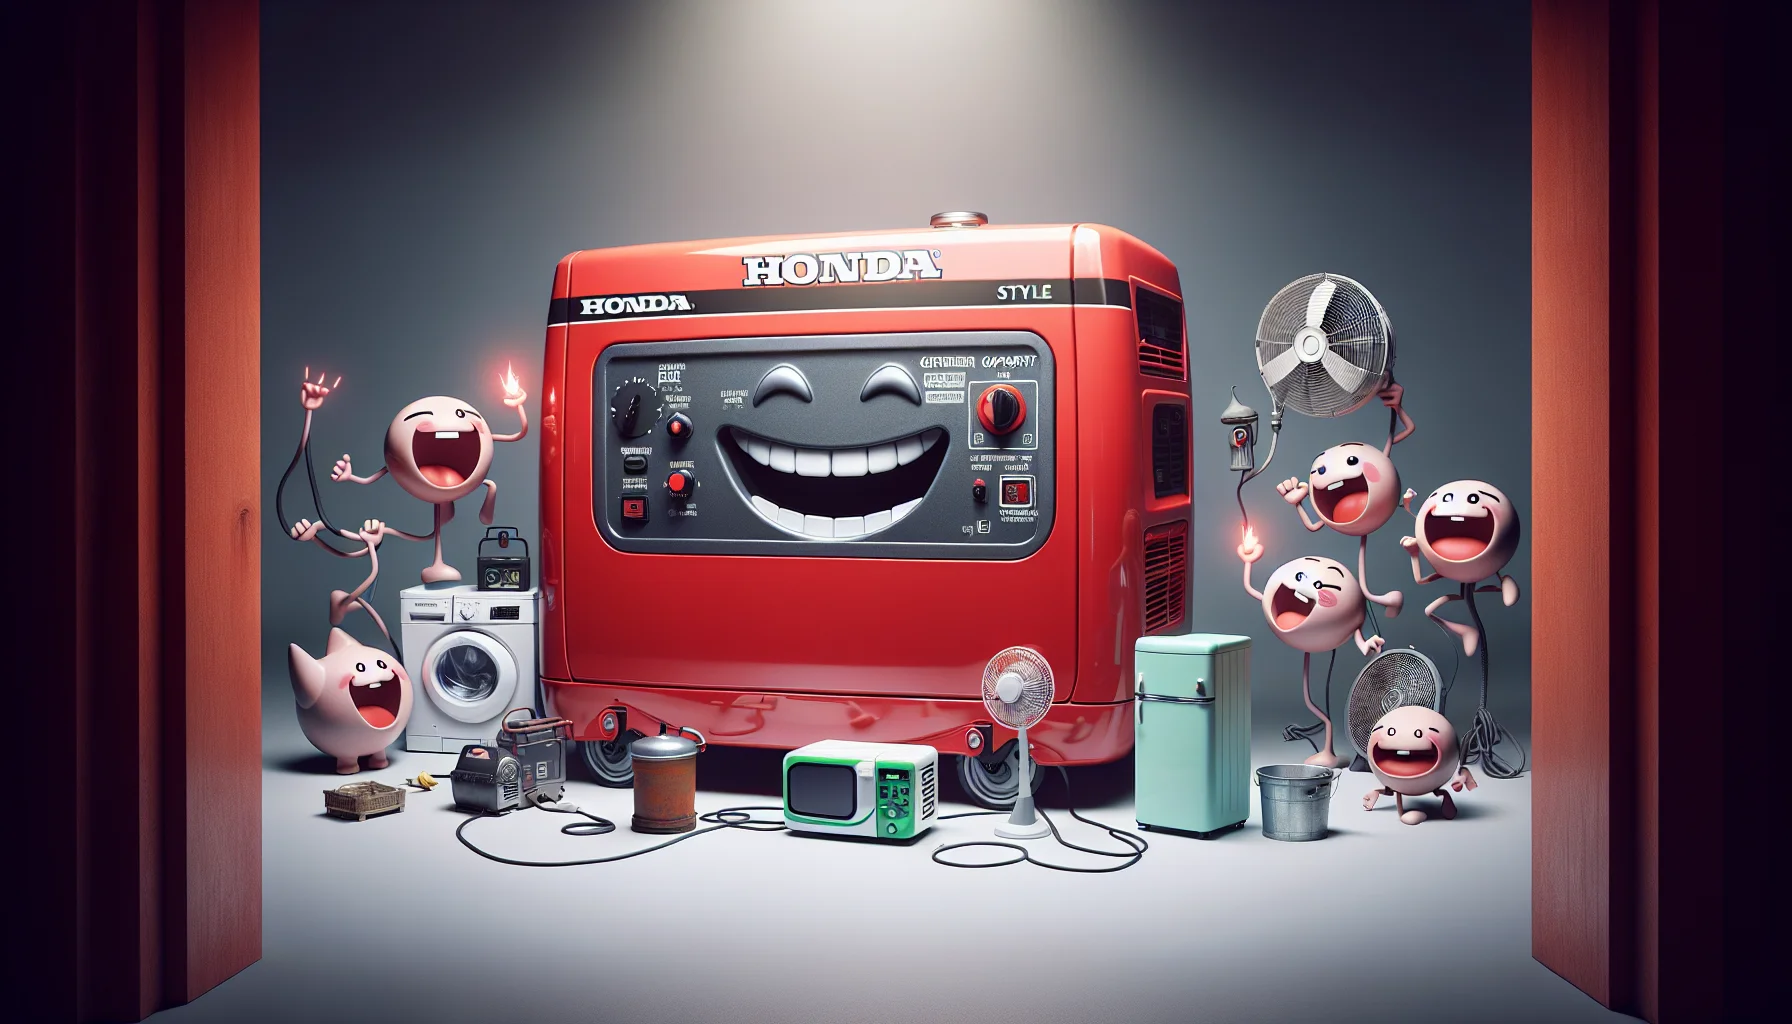 Imagine an amusing scenario where a Honda-style power generator is the main participant. In this eccentric tableau, the generator - painted in bright red with neat, white lettering indicating its height, weight, and capacity - is anthropomorphised, showcasing a broad grin on its metallic facade. This generator is surrounded by other household appliances like a cheerfully lit fridge, a bouncing washing machine, and a cool-looked fan, all of them elated with glee, as if enjoying a party fueled by the power supplied by the generator. This humorous vision captures the delight that comes with reliable electricity generation.